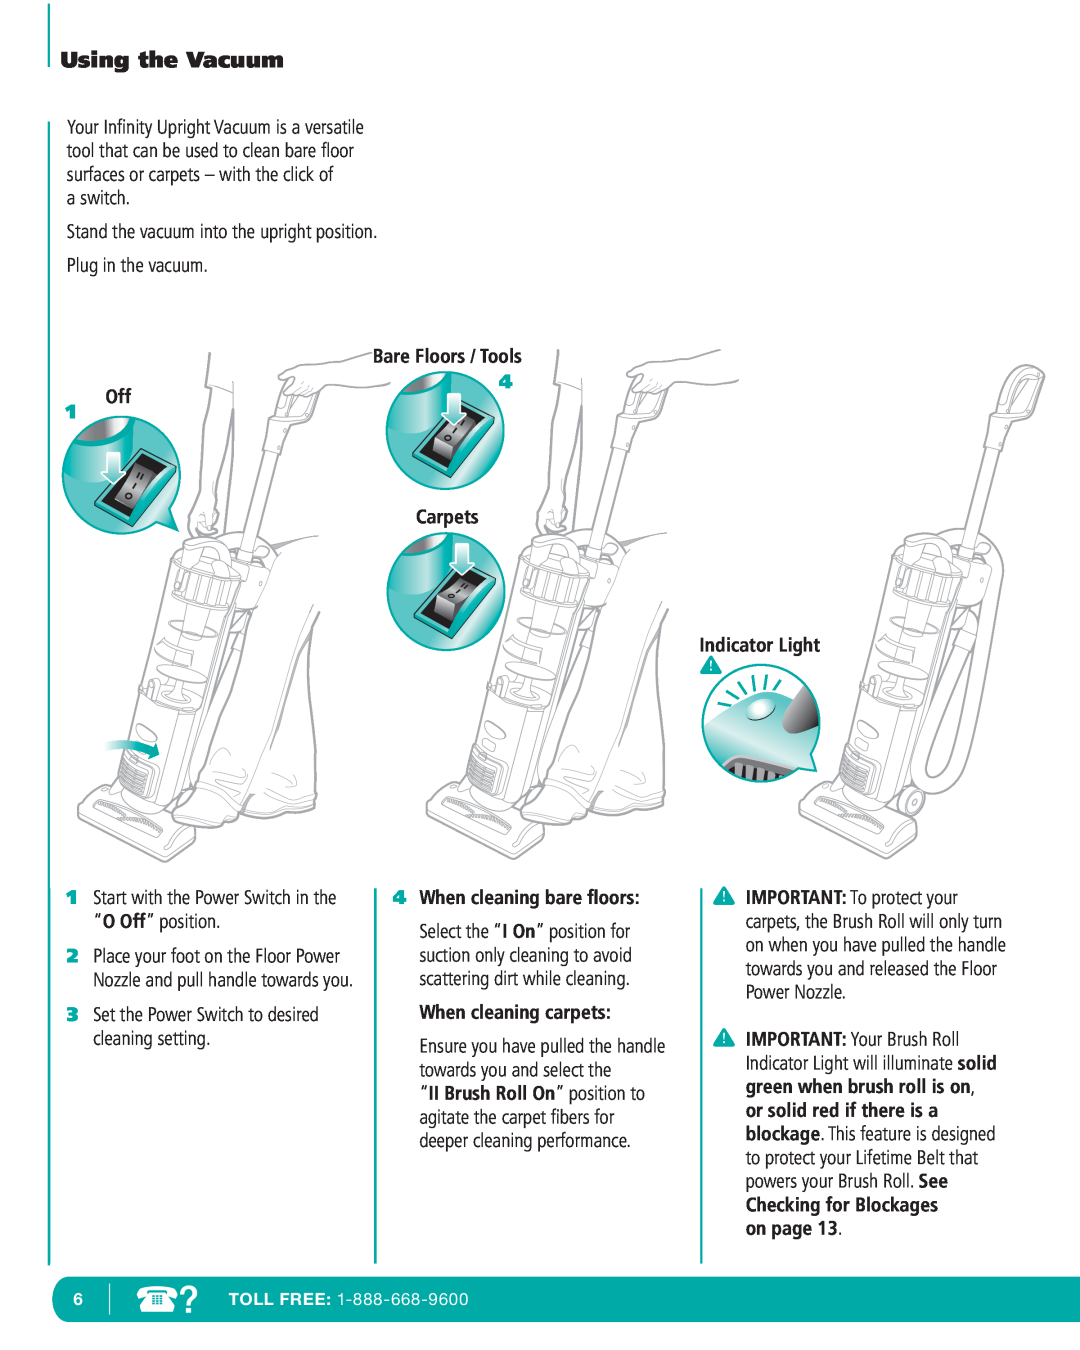 Infinity NV22 a switch, Stand the vacuum into the upright position, Plug in the vacuum, Bare Floors / Tools, Toll Free 